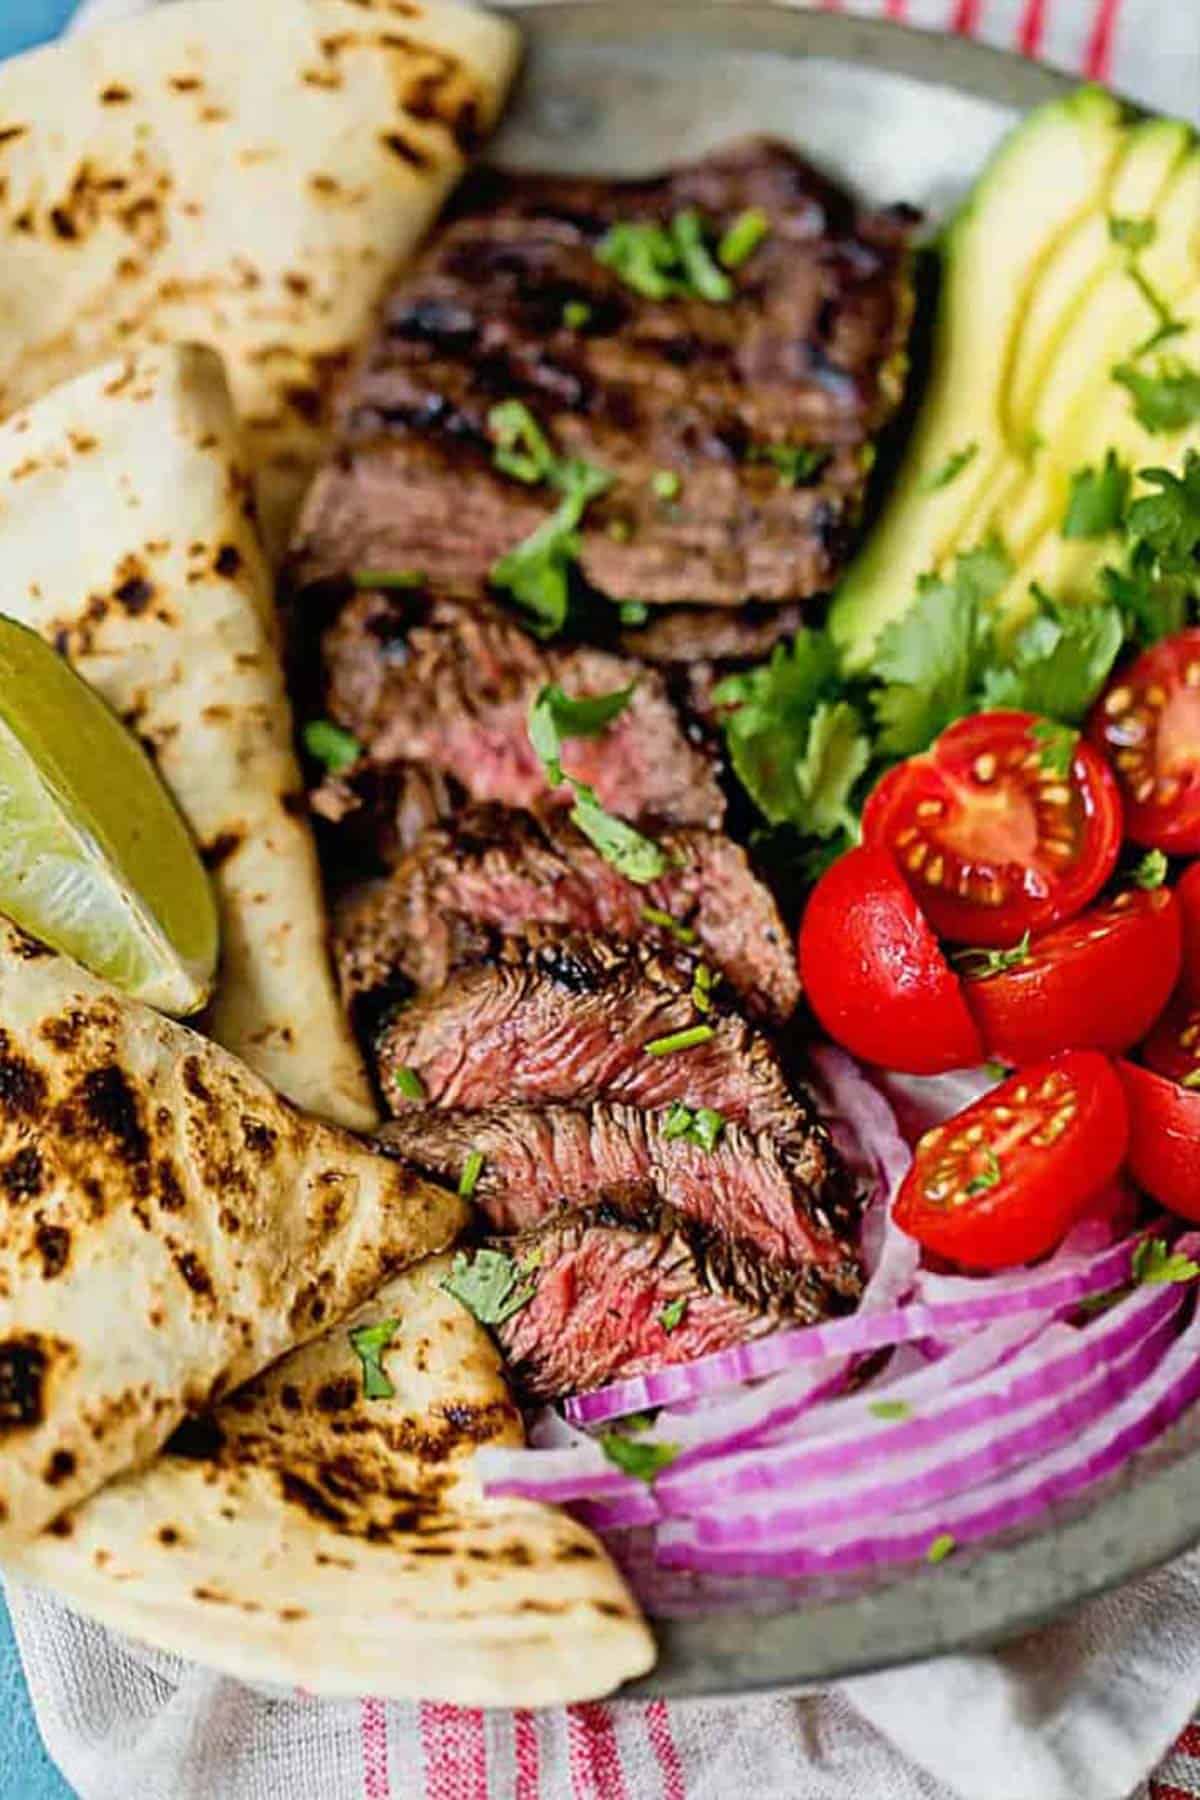 Marinated grilled skirt steak on platter with grilled tortillas, onions and tomatoes ready to serve for dinner.